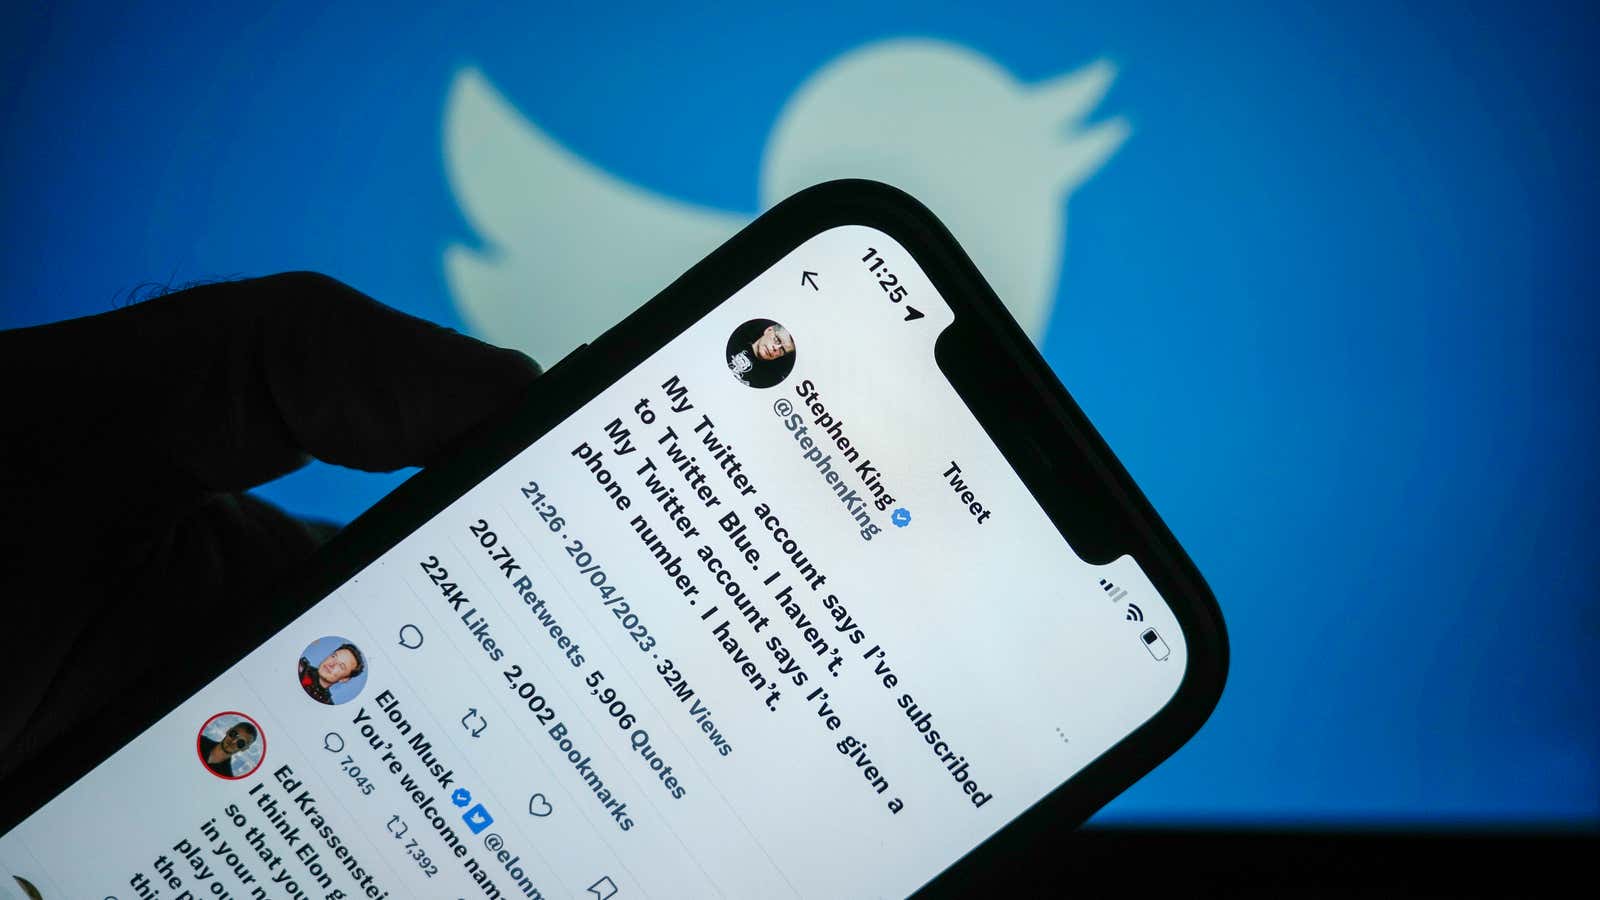 Stephen King is mad about Twitter Blue